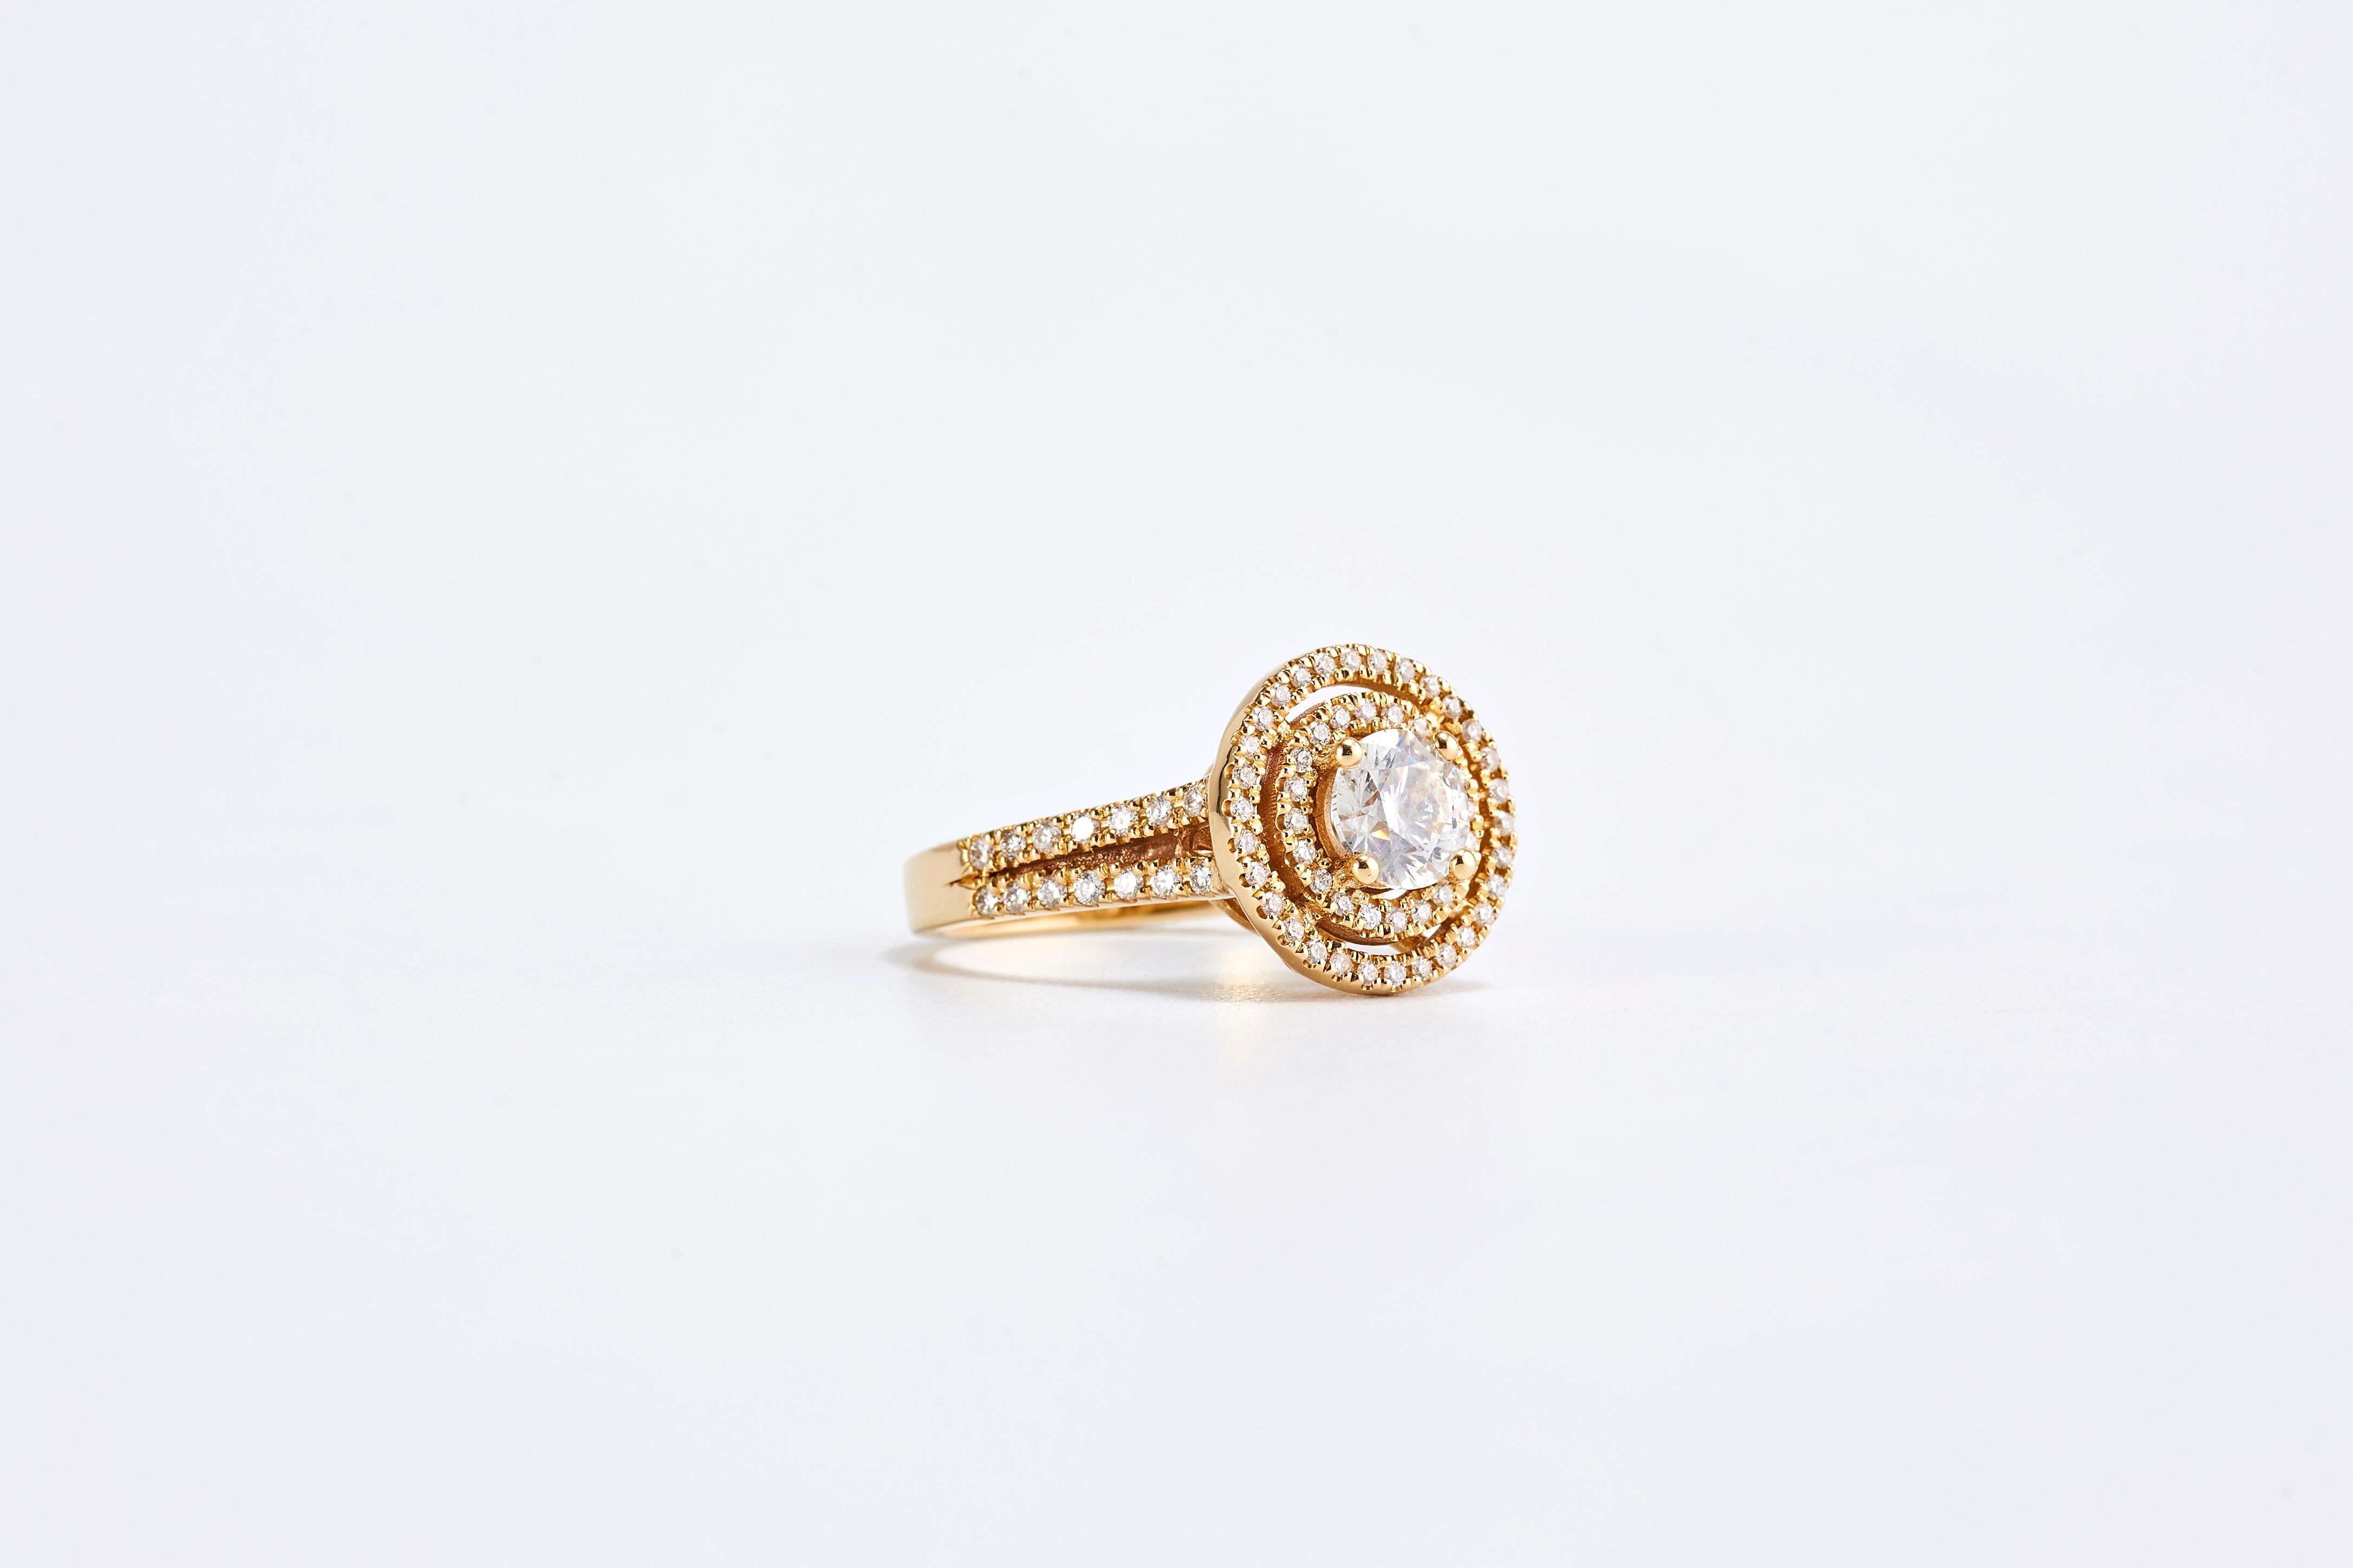 Engagement Ring with Central Round Cut Diamond and Double Halo in 18 Karat Yellow Gold
Designed around a central diamond, the double halo and pavé-set band are absolutely gorgeous.
Yellow gold,  Center stone 1.01 ct F VS1. Side diamonds are 1.05 ct